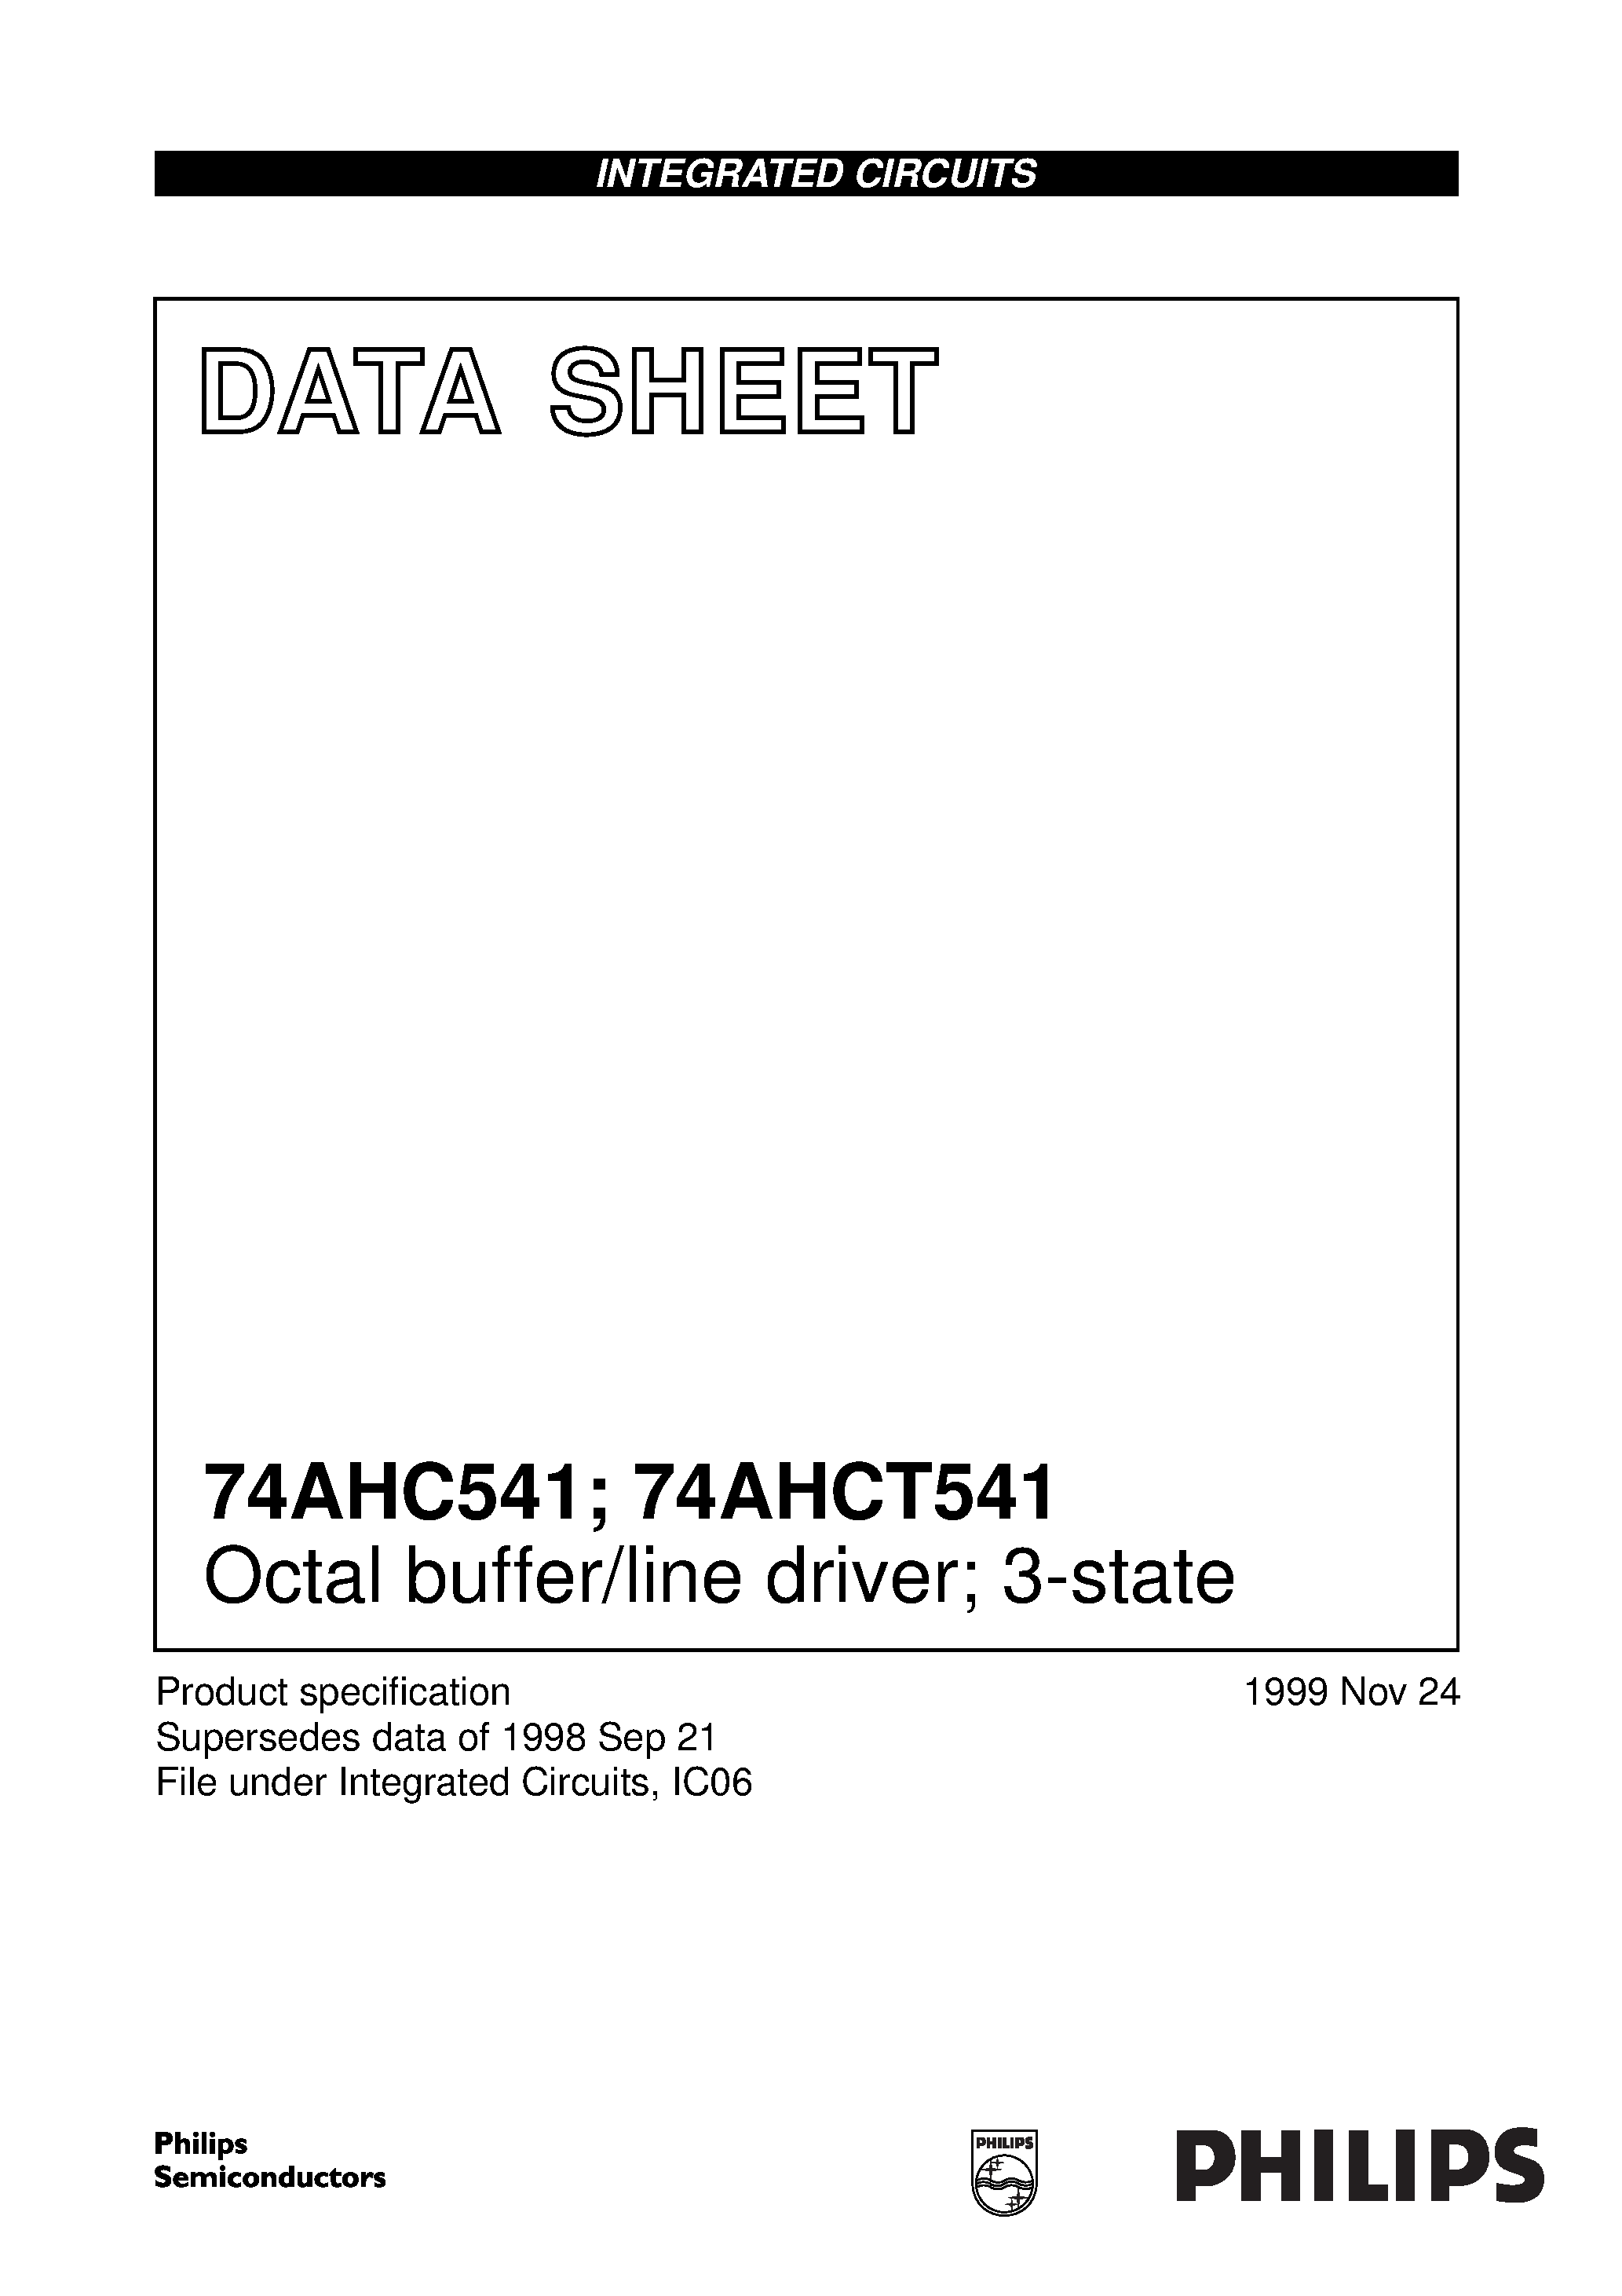 Datasheet 74AHCT541PW - Octal buffer/line driver; 3-state page 1